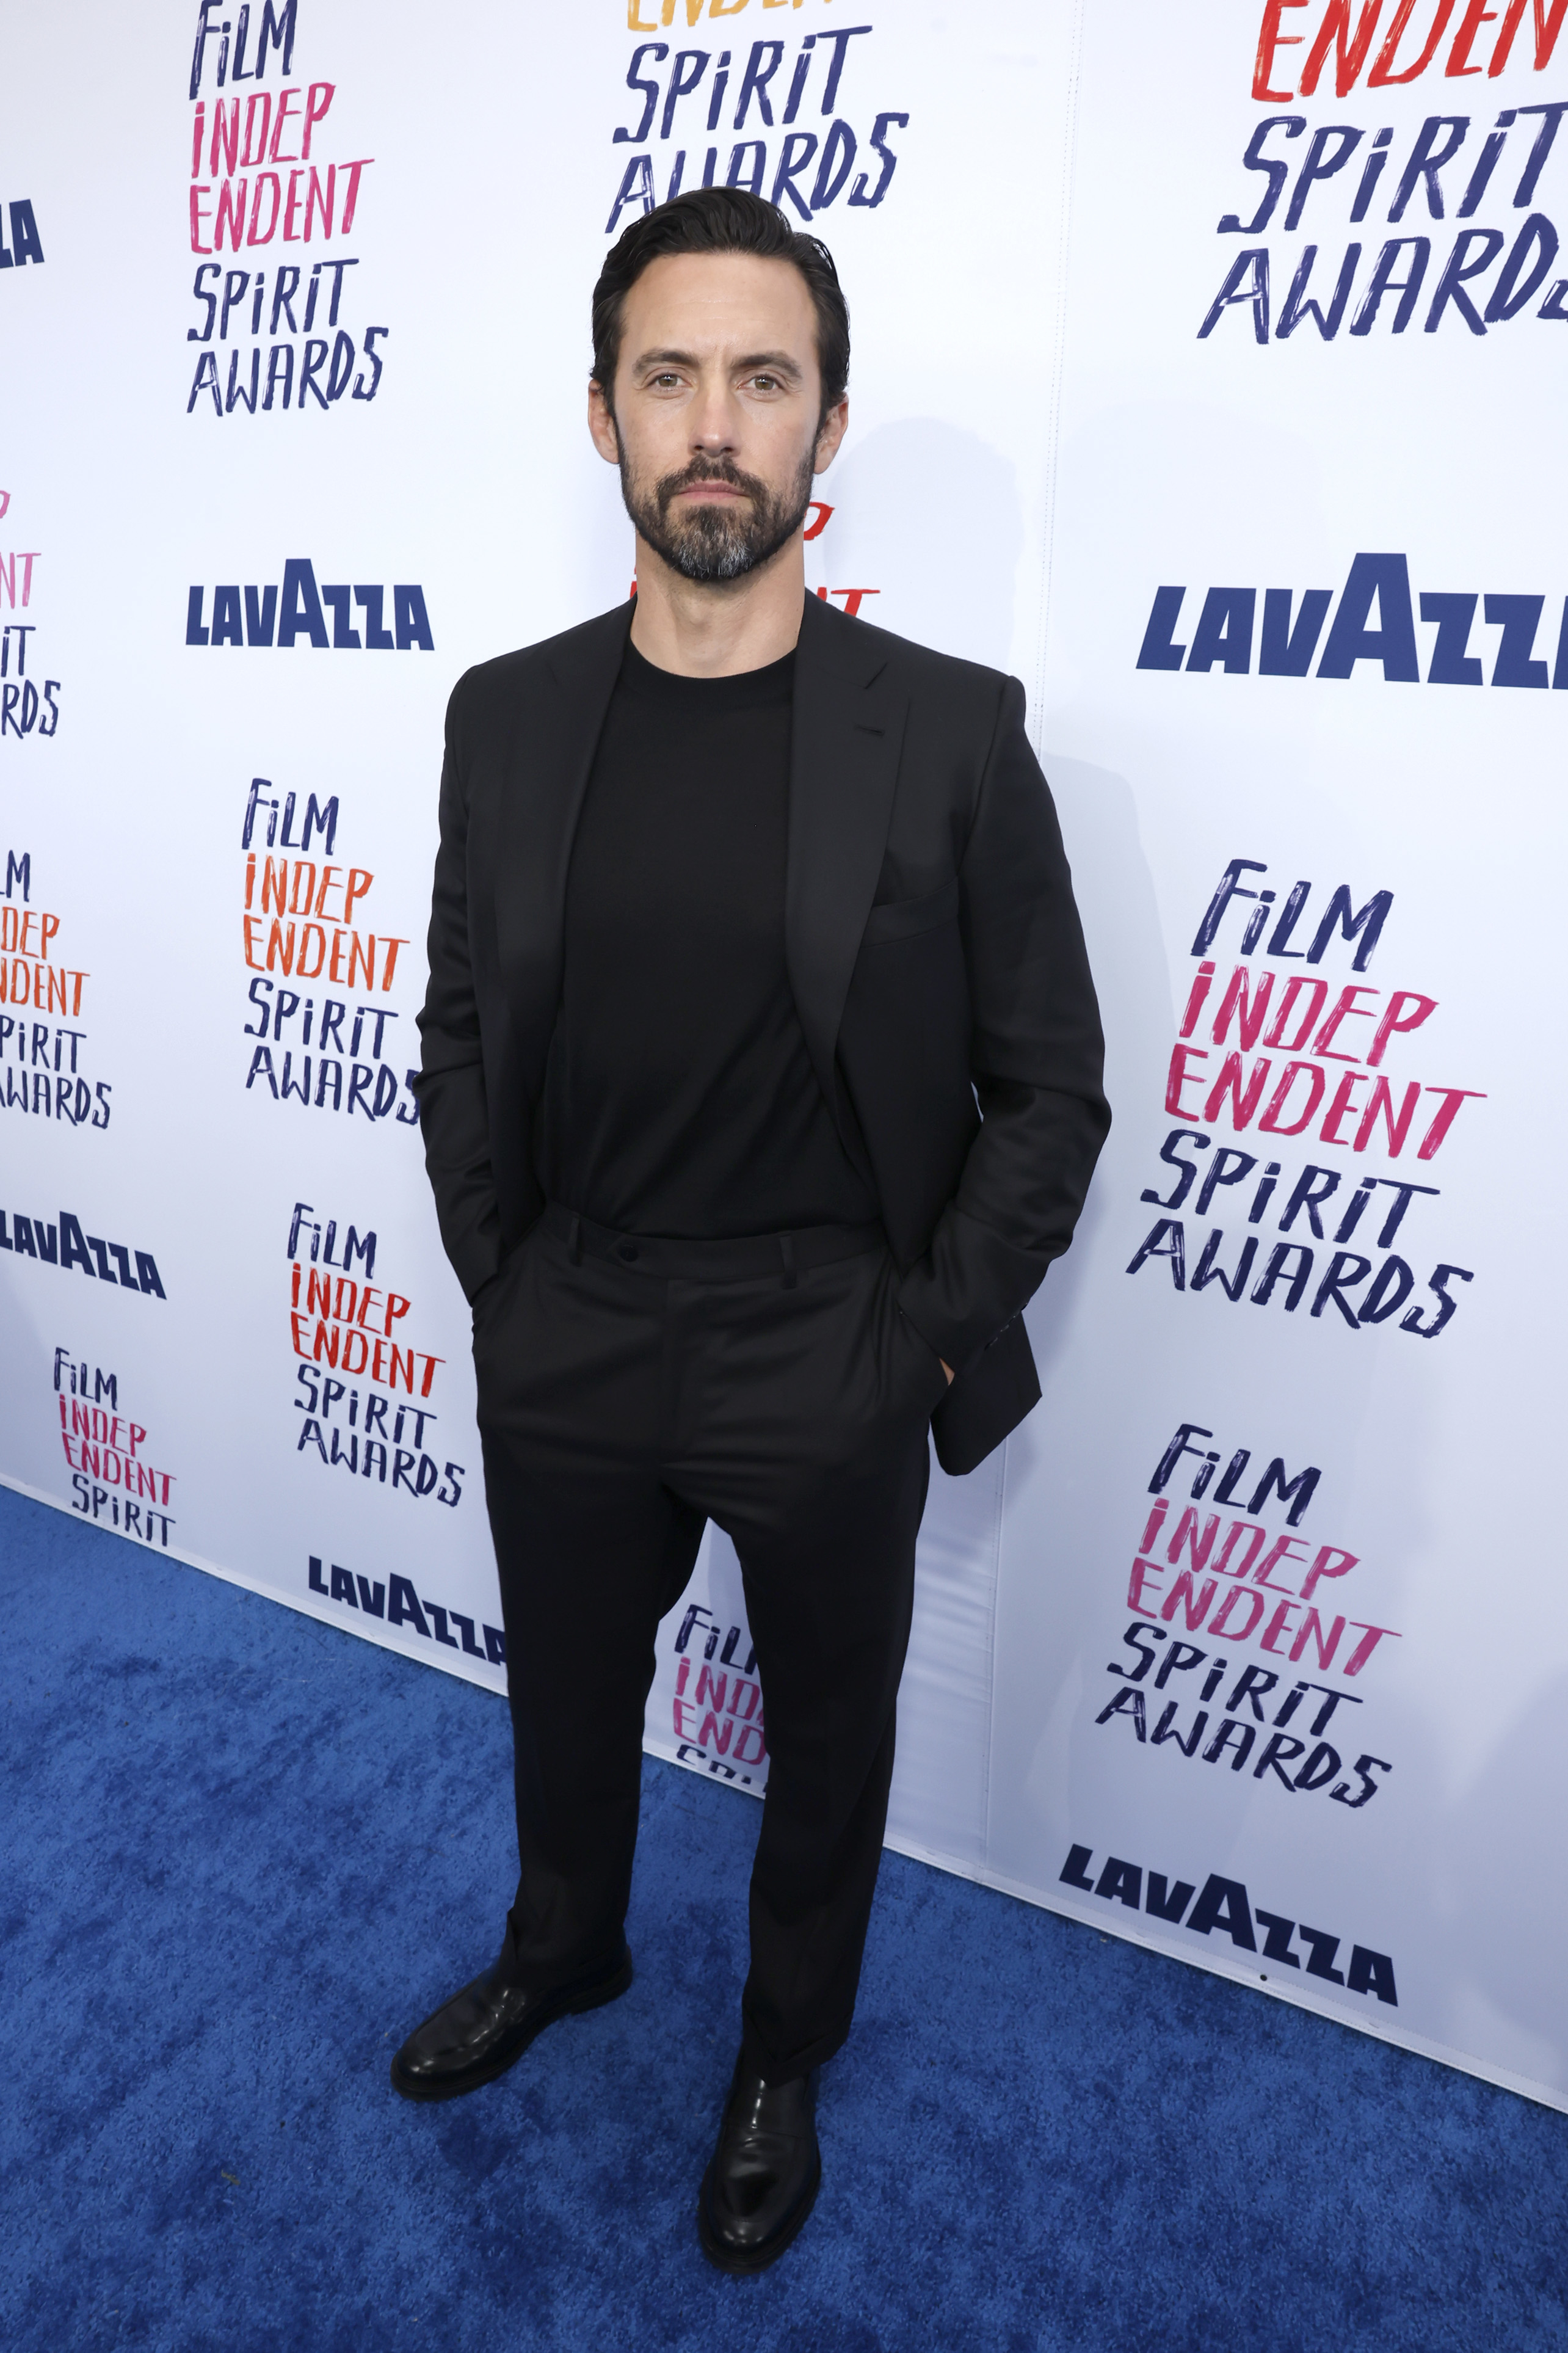 Milo in a suit poses at the Film Independent Spirit Awards